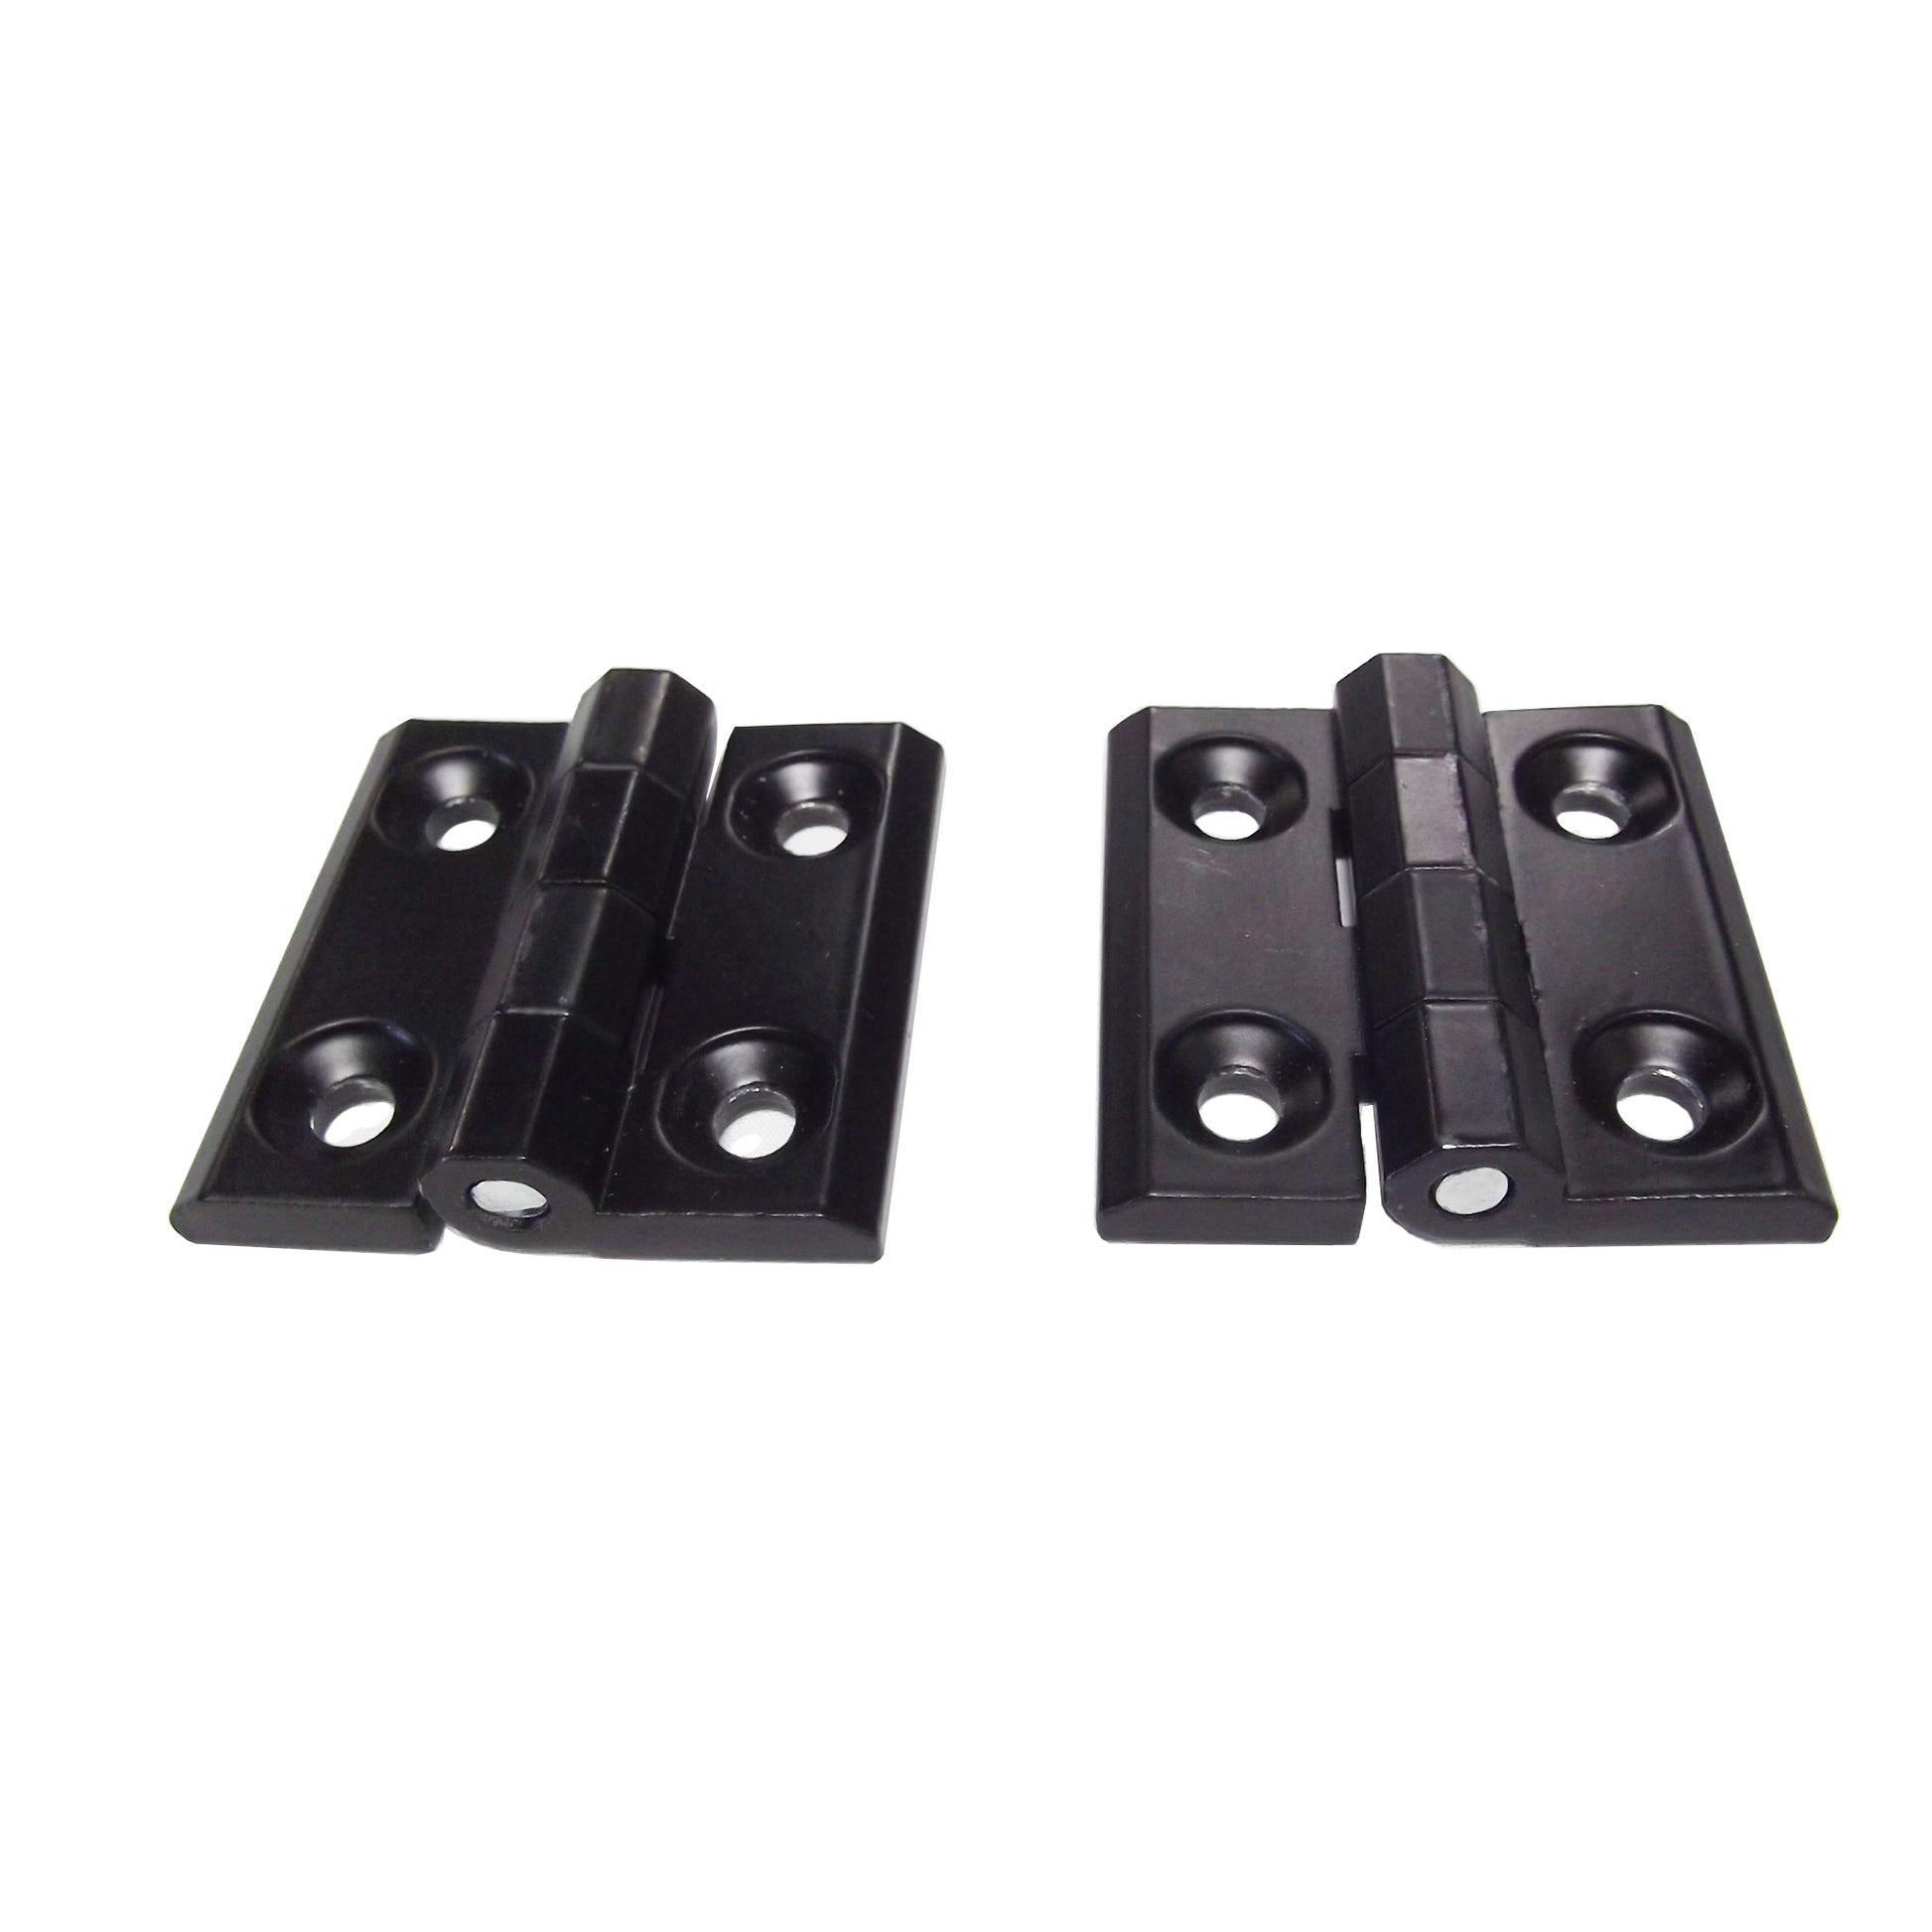 Zinc Alloy Hinge for X-2580 Air Scrubber